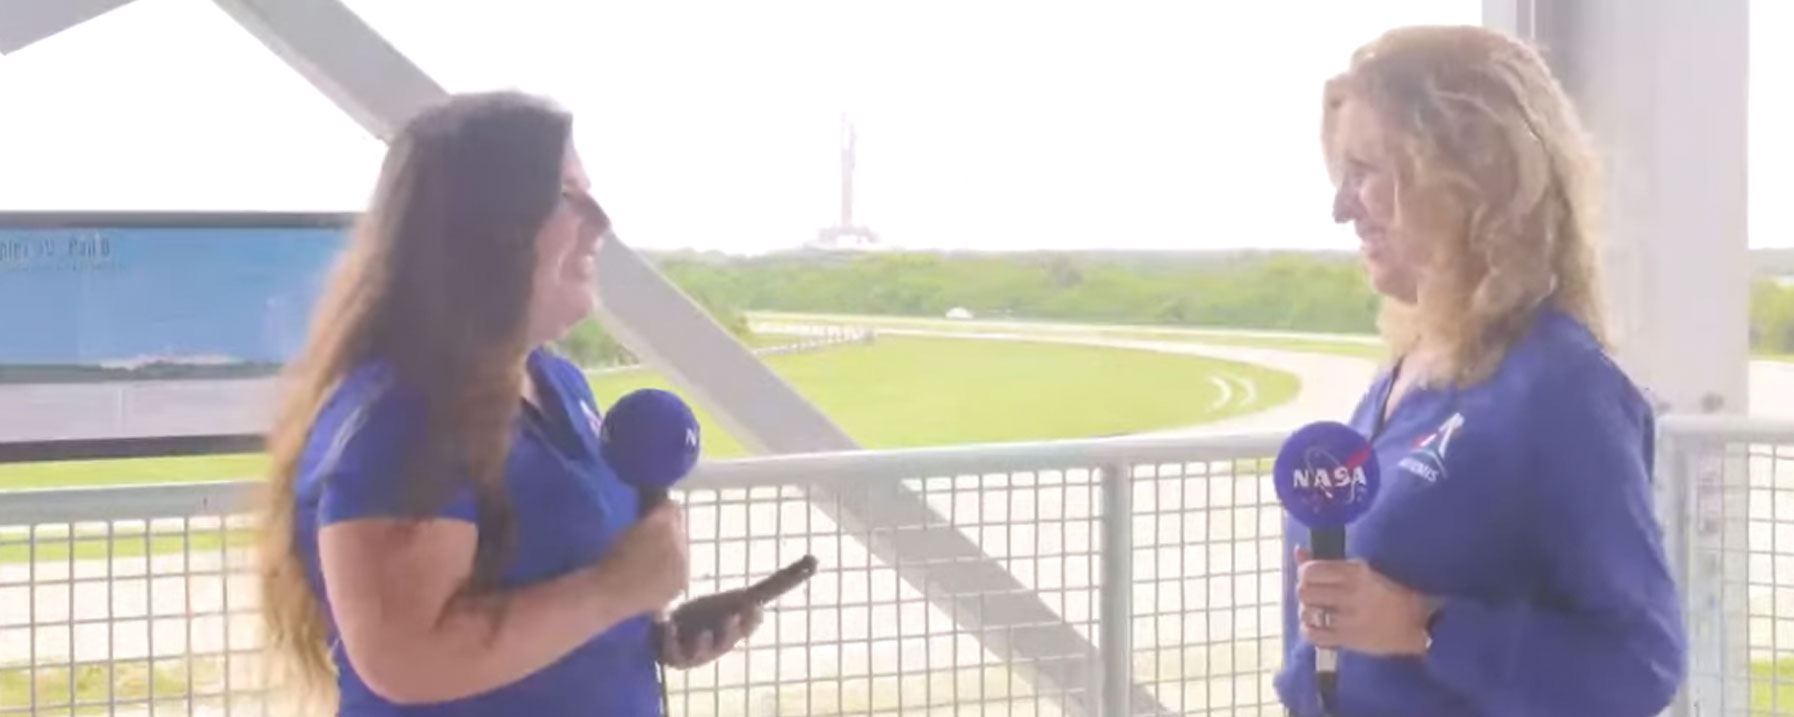 Alyssa Lee, SLS social media specialist, and Sharon Cobb, SLS associate program manager, give details about the Moon rocket of Artemis that will launch this new era of space exploration. 